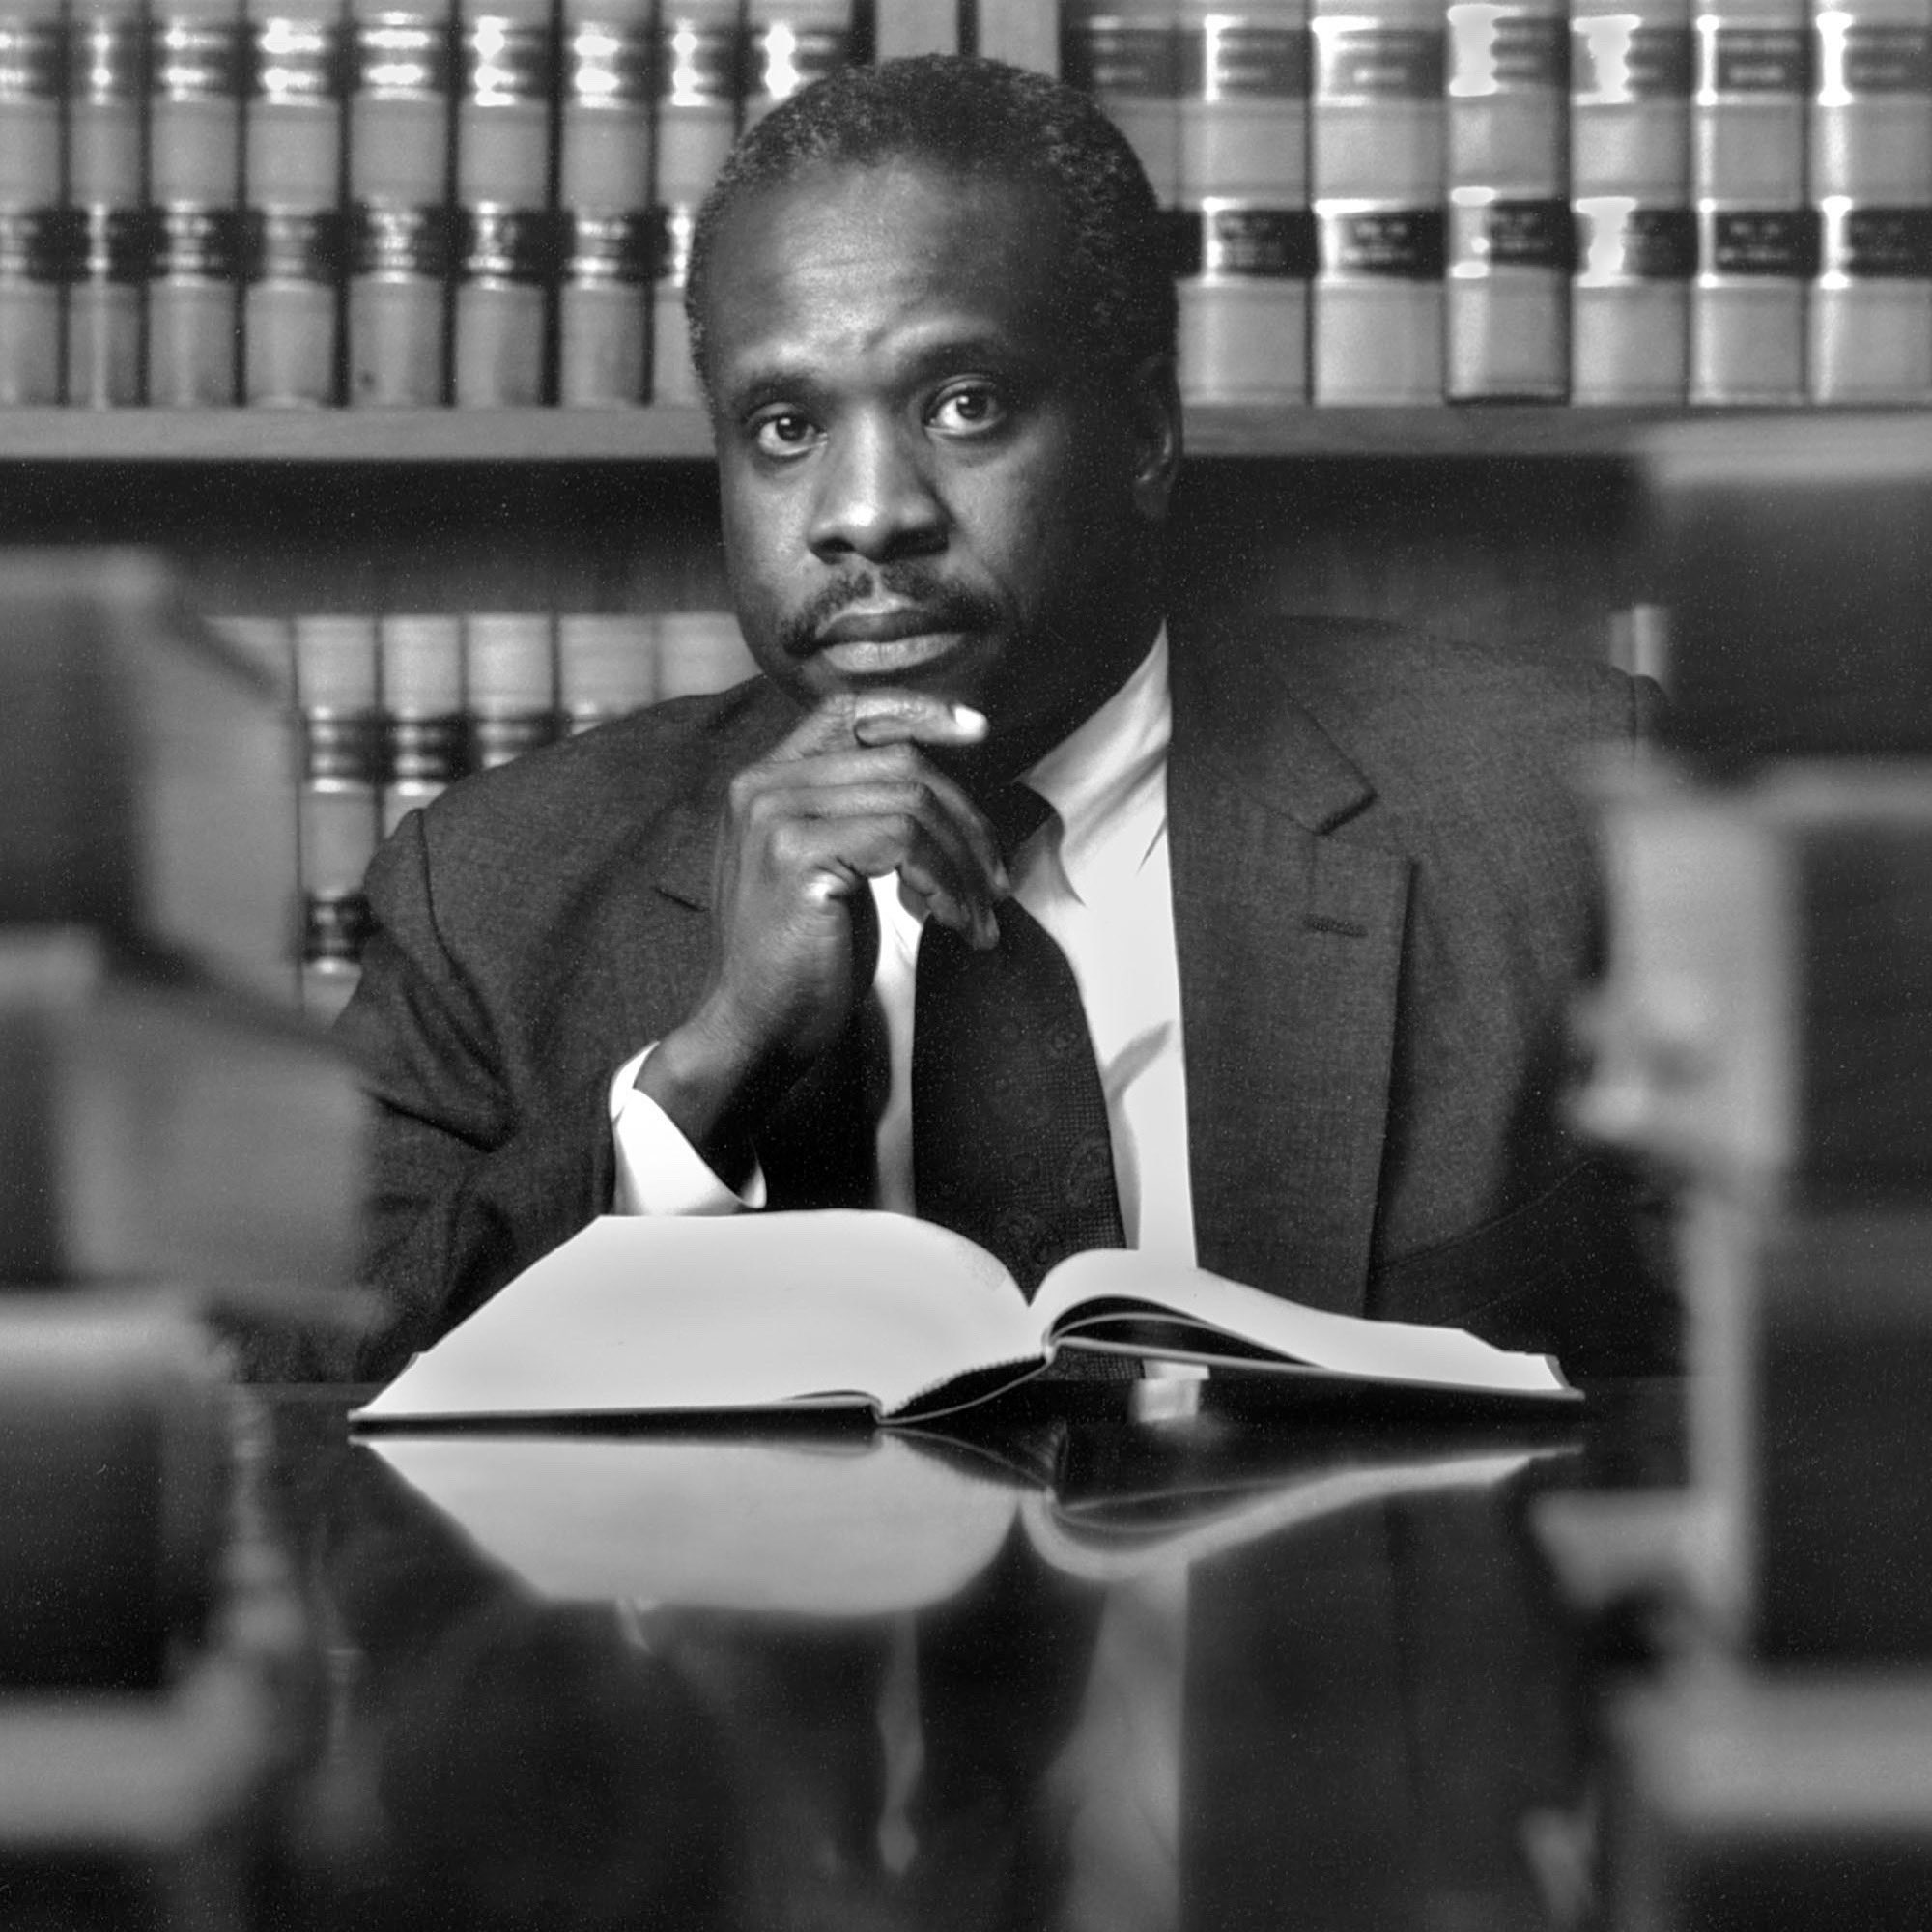 Happy birthday to the legend, Justice Clarence Thomas! 